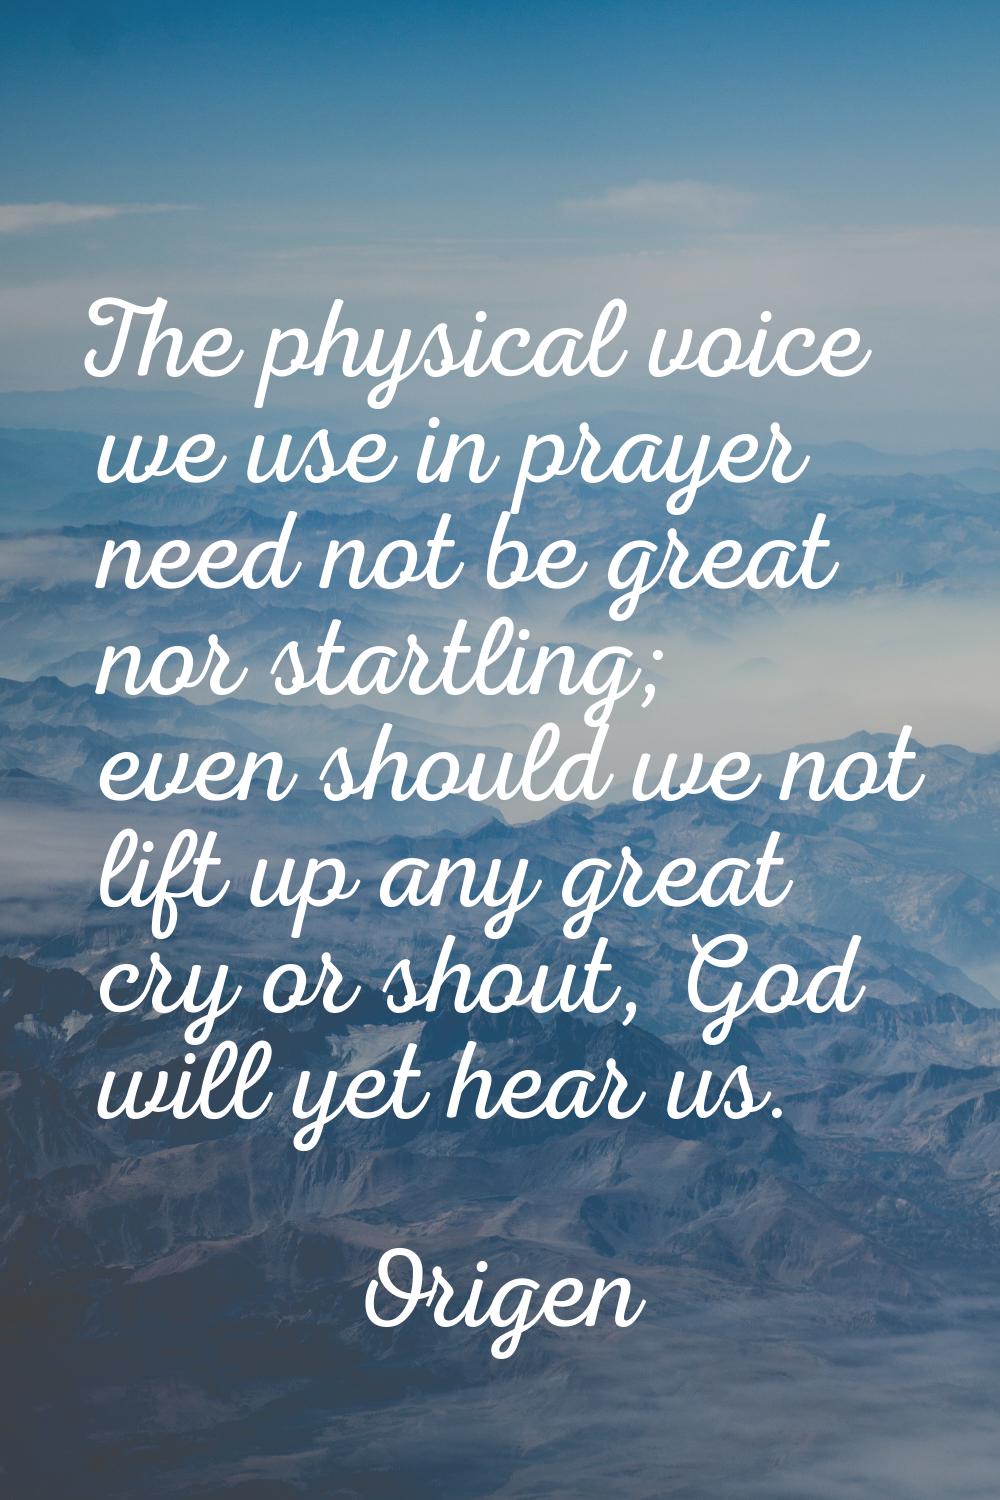 The physical voice we use in prayer need not be great nor startling; even should we not lift up any